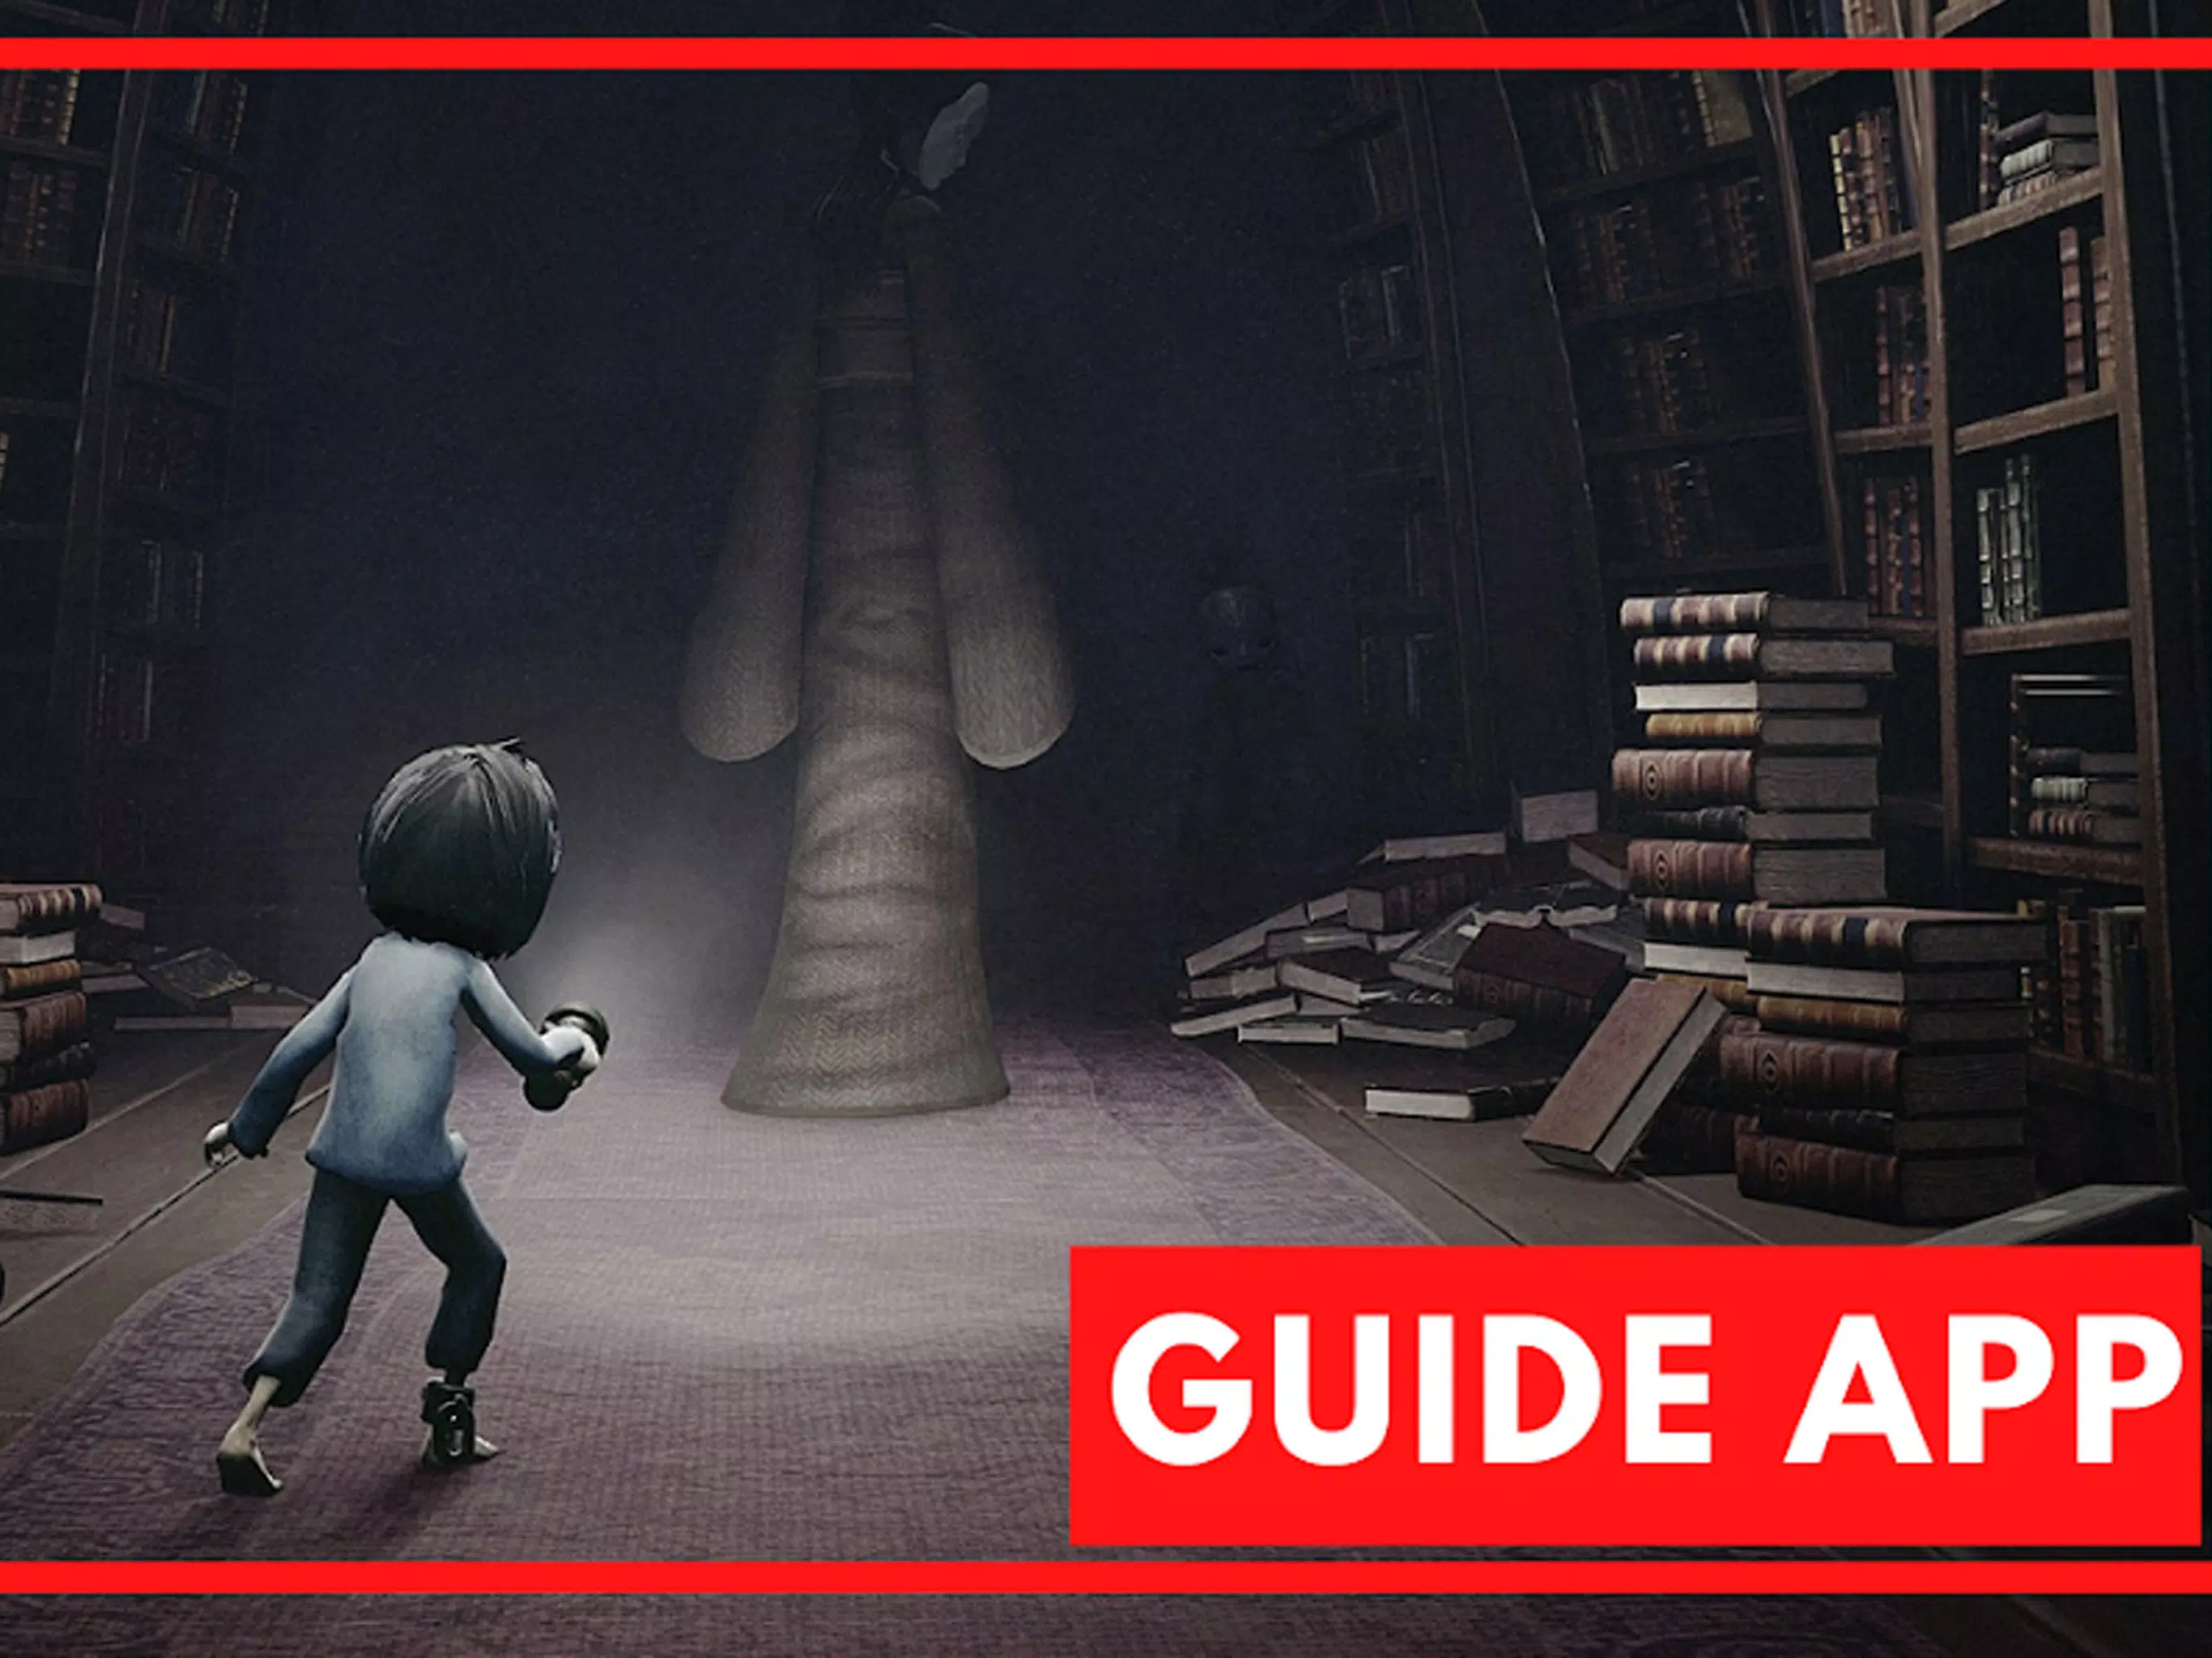 Little Nightmares 2 Android Mobile Download #offlinegame #androidgames